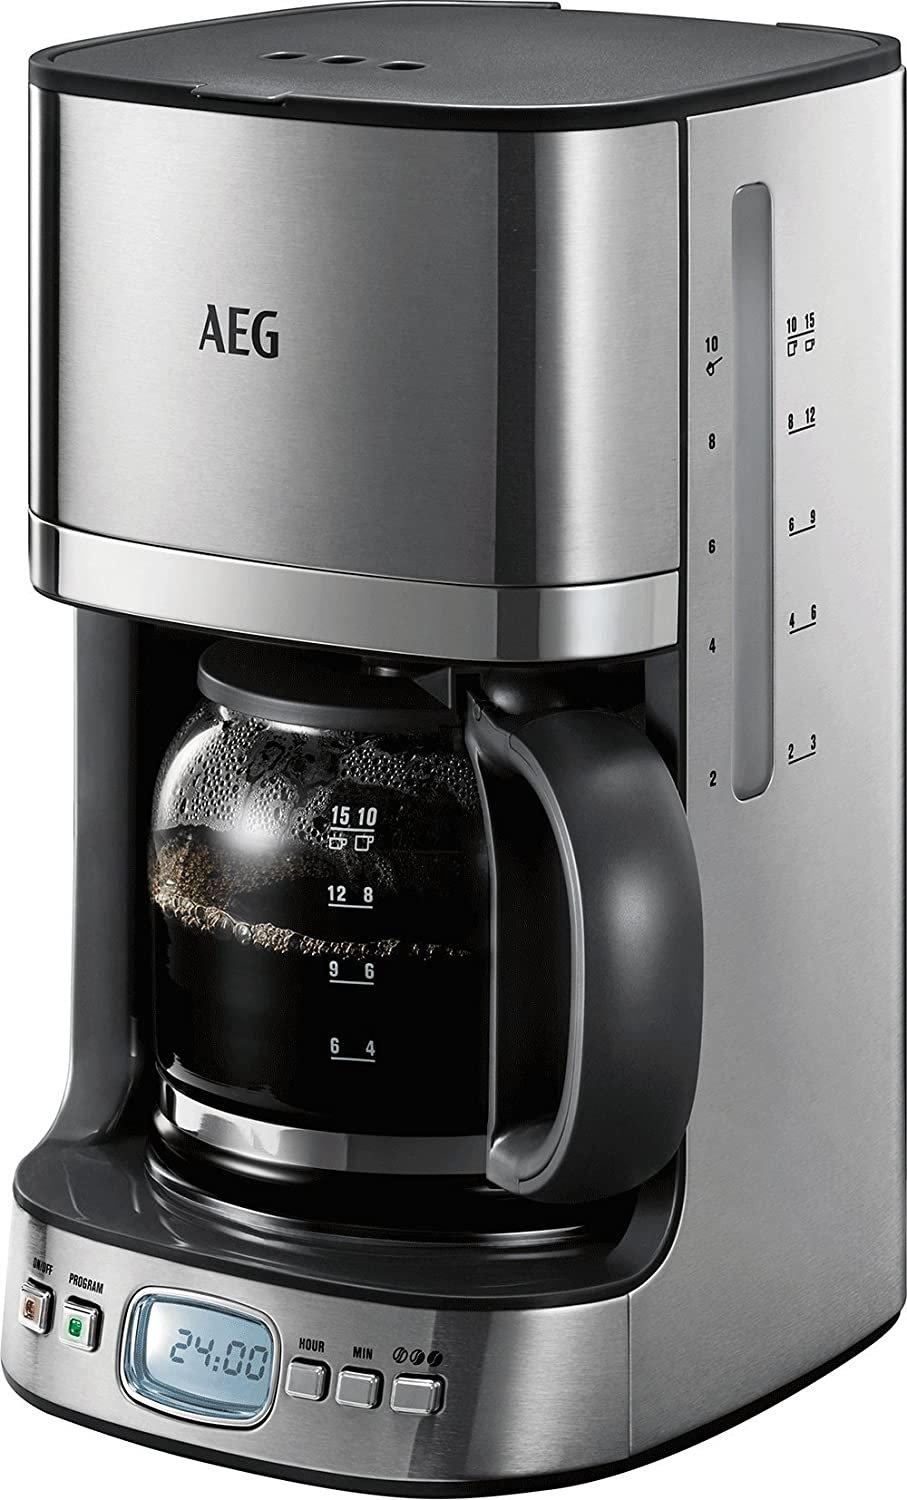 AEG KF 7600 Coffee Machine Programmable Timer Aroma Function Permanent Filter LCD Display Water Level and Coffee Dispenser Indicator 1.25 L Safety Shut-Off Brushed Stainless Steel